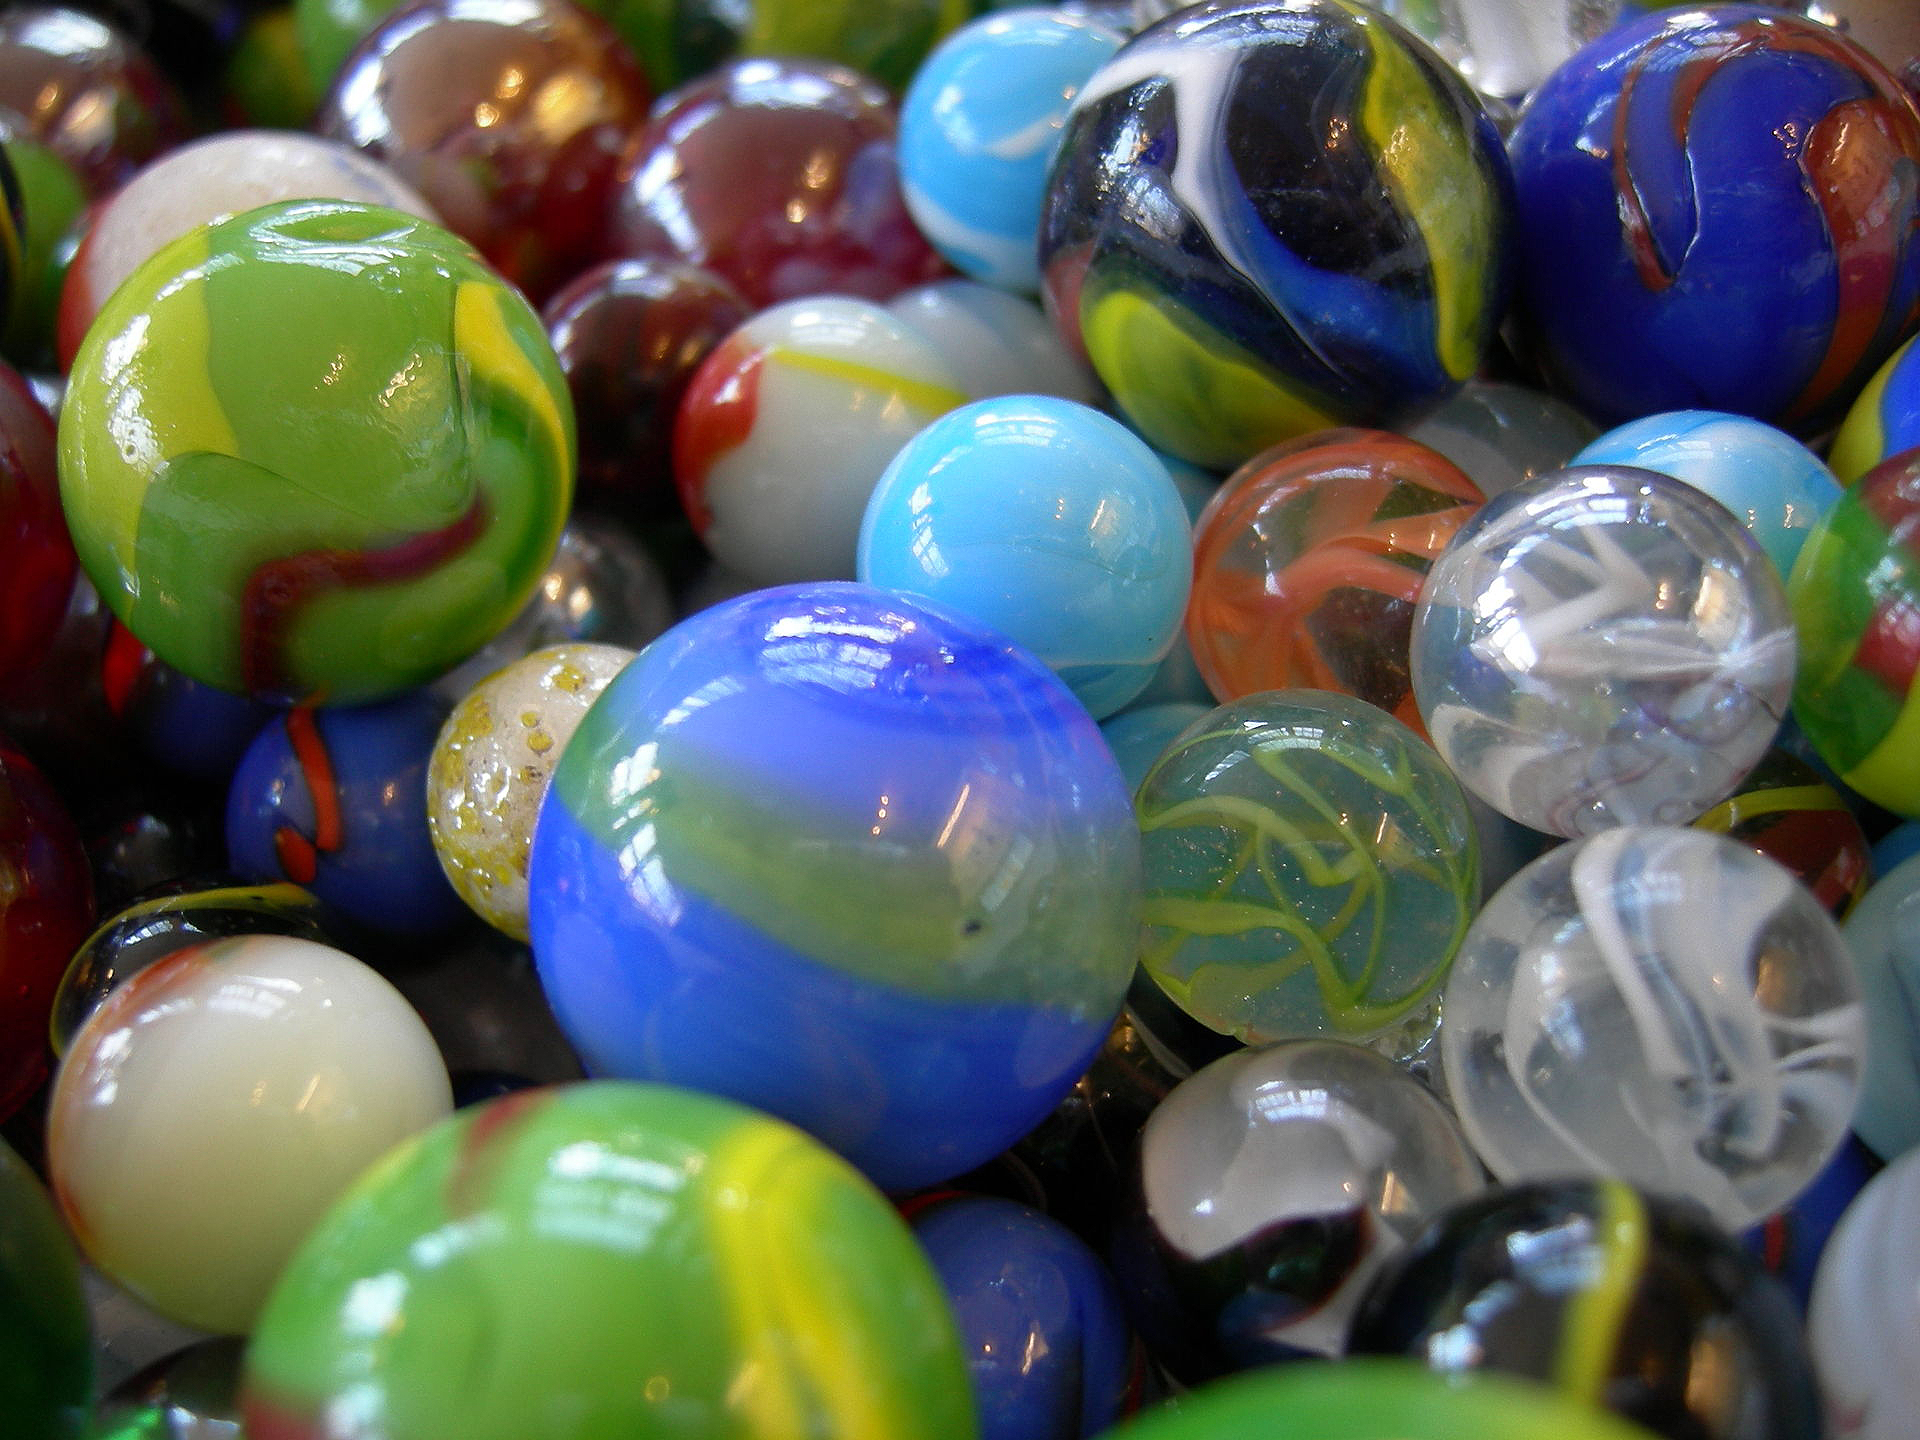 Colorful machine-made glass marbles of various sizes and types. Image by Joe Mabel. This file is licensed under the Creative Commons Attribution-Share Alike 3.0 Unported license.